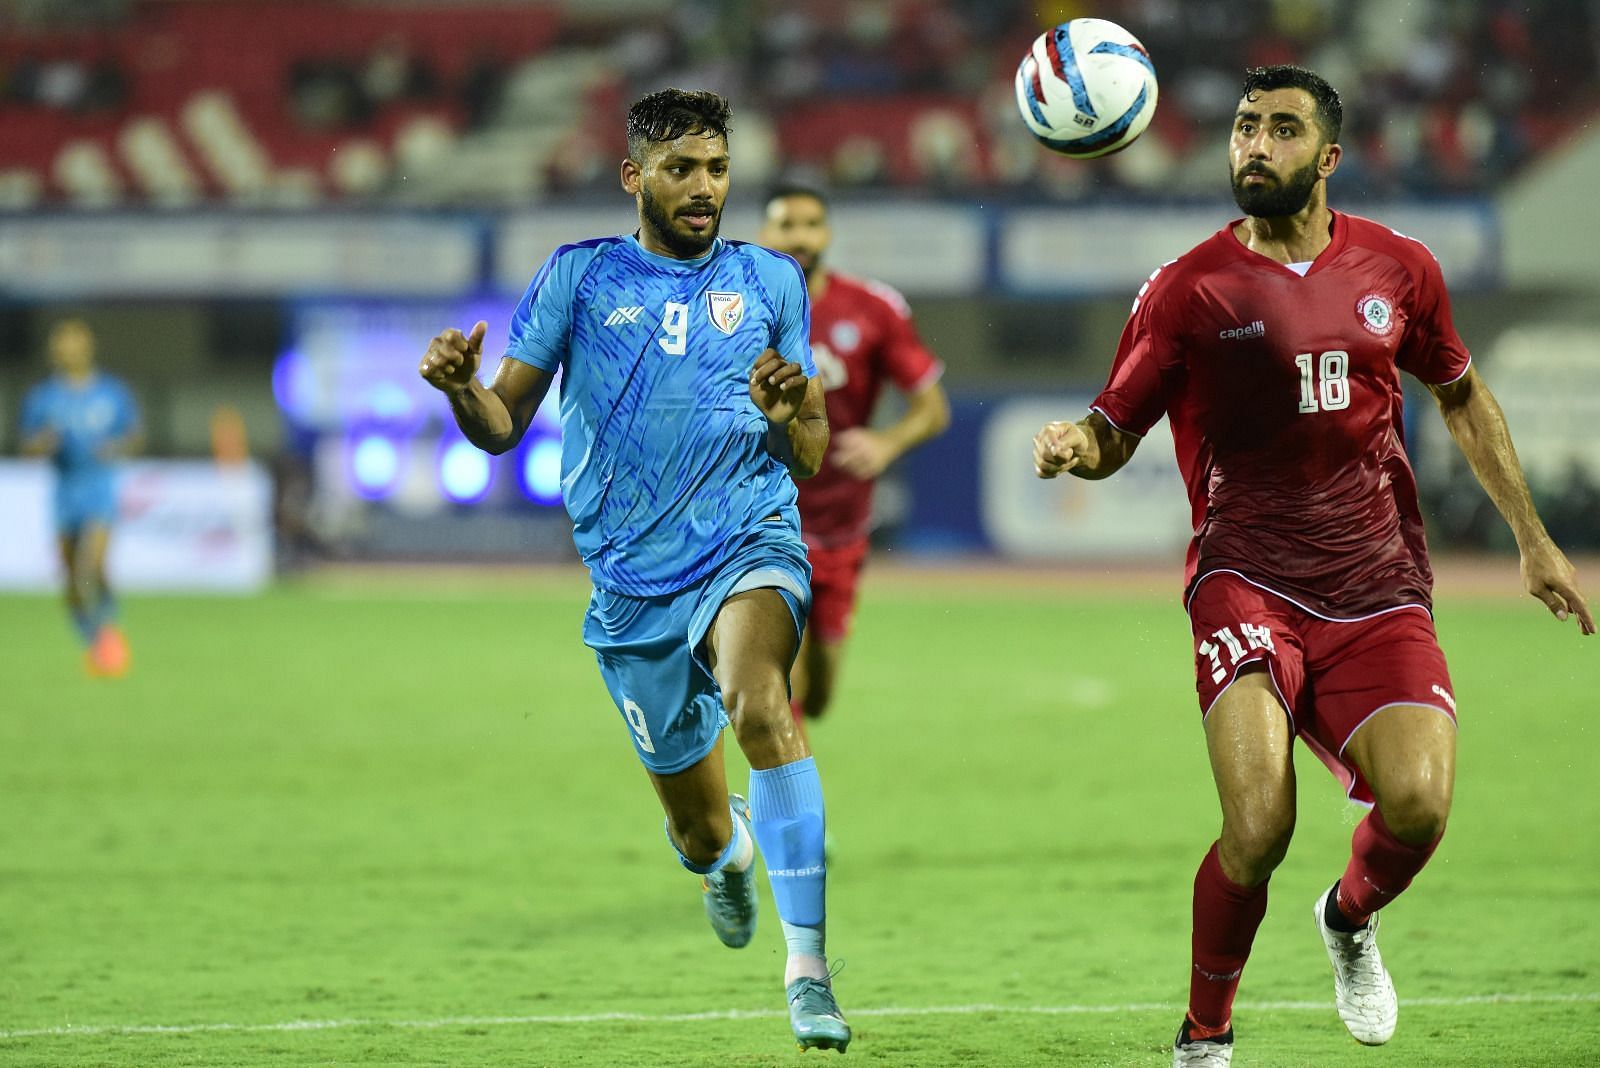 Rahim Ali missed some good chances in the second half (Image courtesy: AIFF Media)